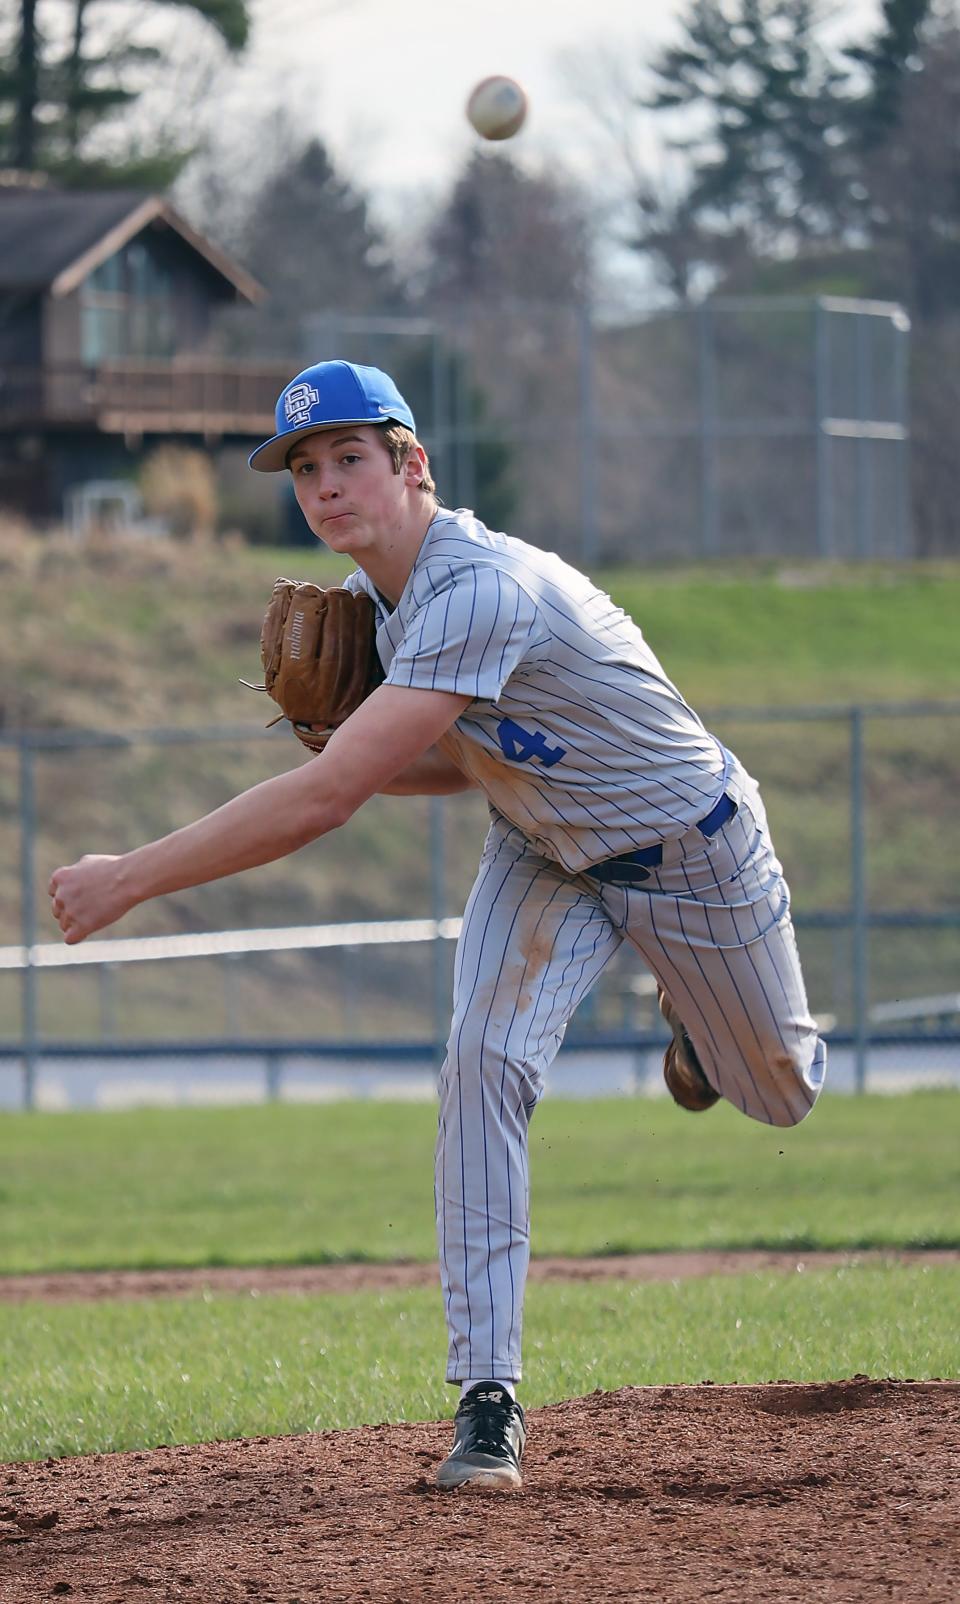 Buckeye Trail's Nick Neuhart (4) delivers a pitch during a 10-1 victory over visiting Bridgeport earlier this season. Neuhart was named IVC Player of the Year for the IVC champion Buckeye Trail squad.